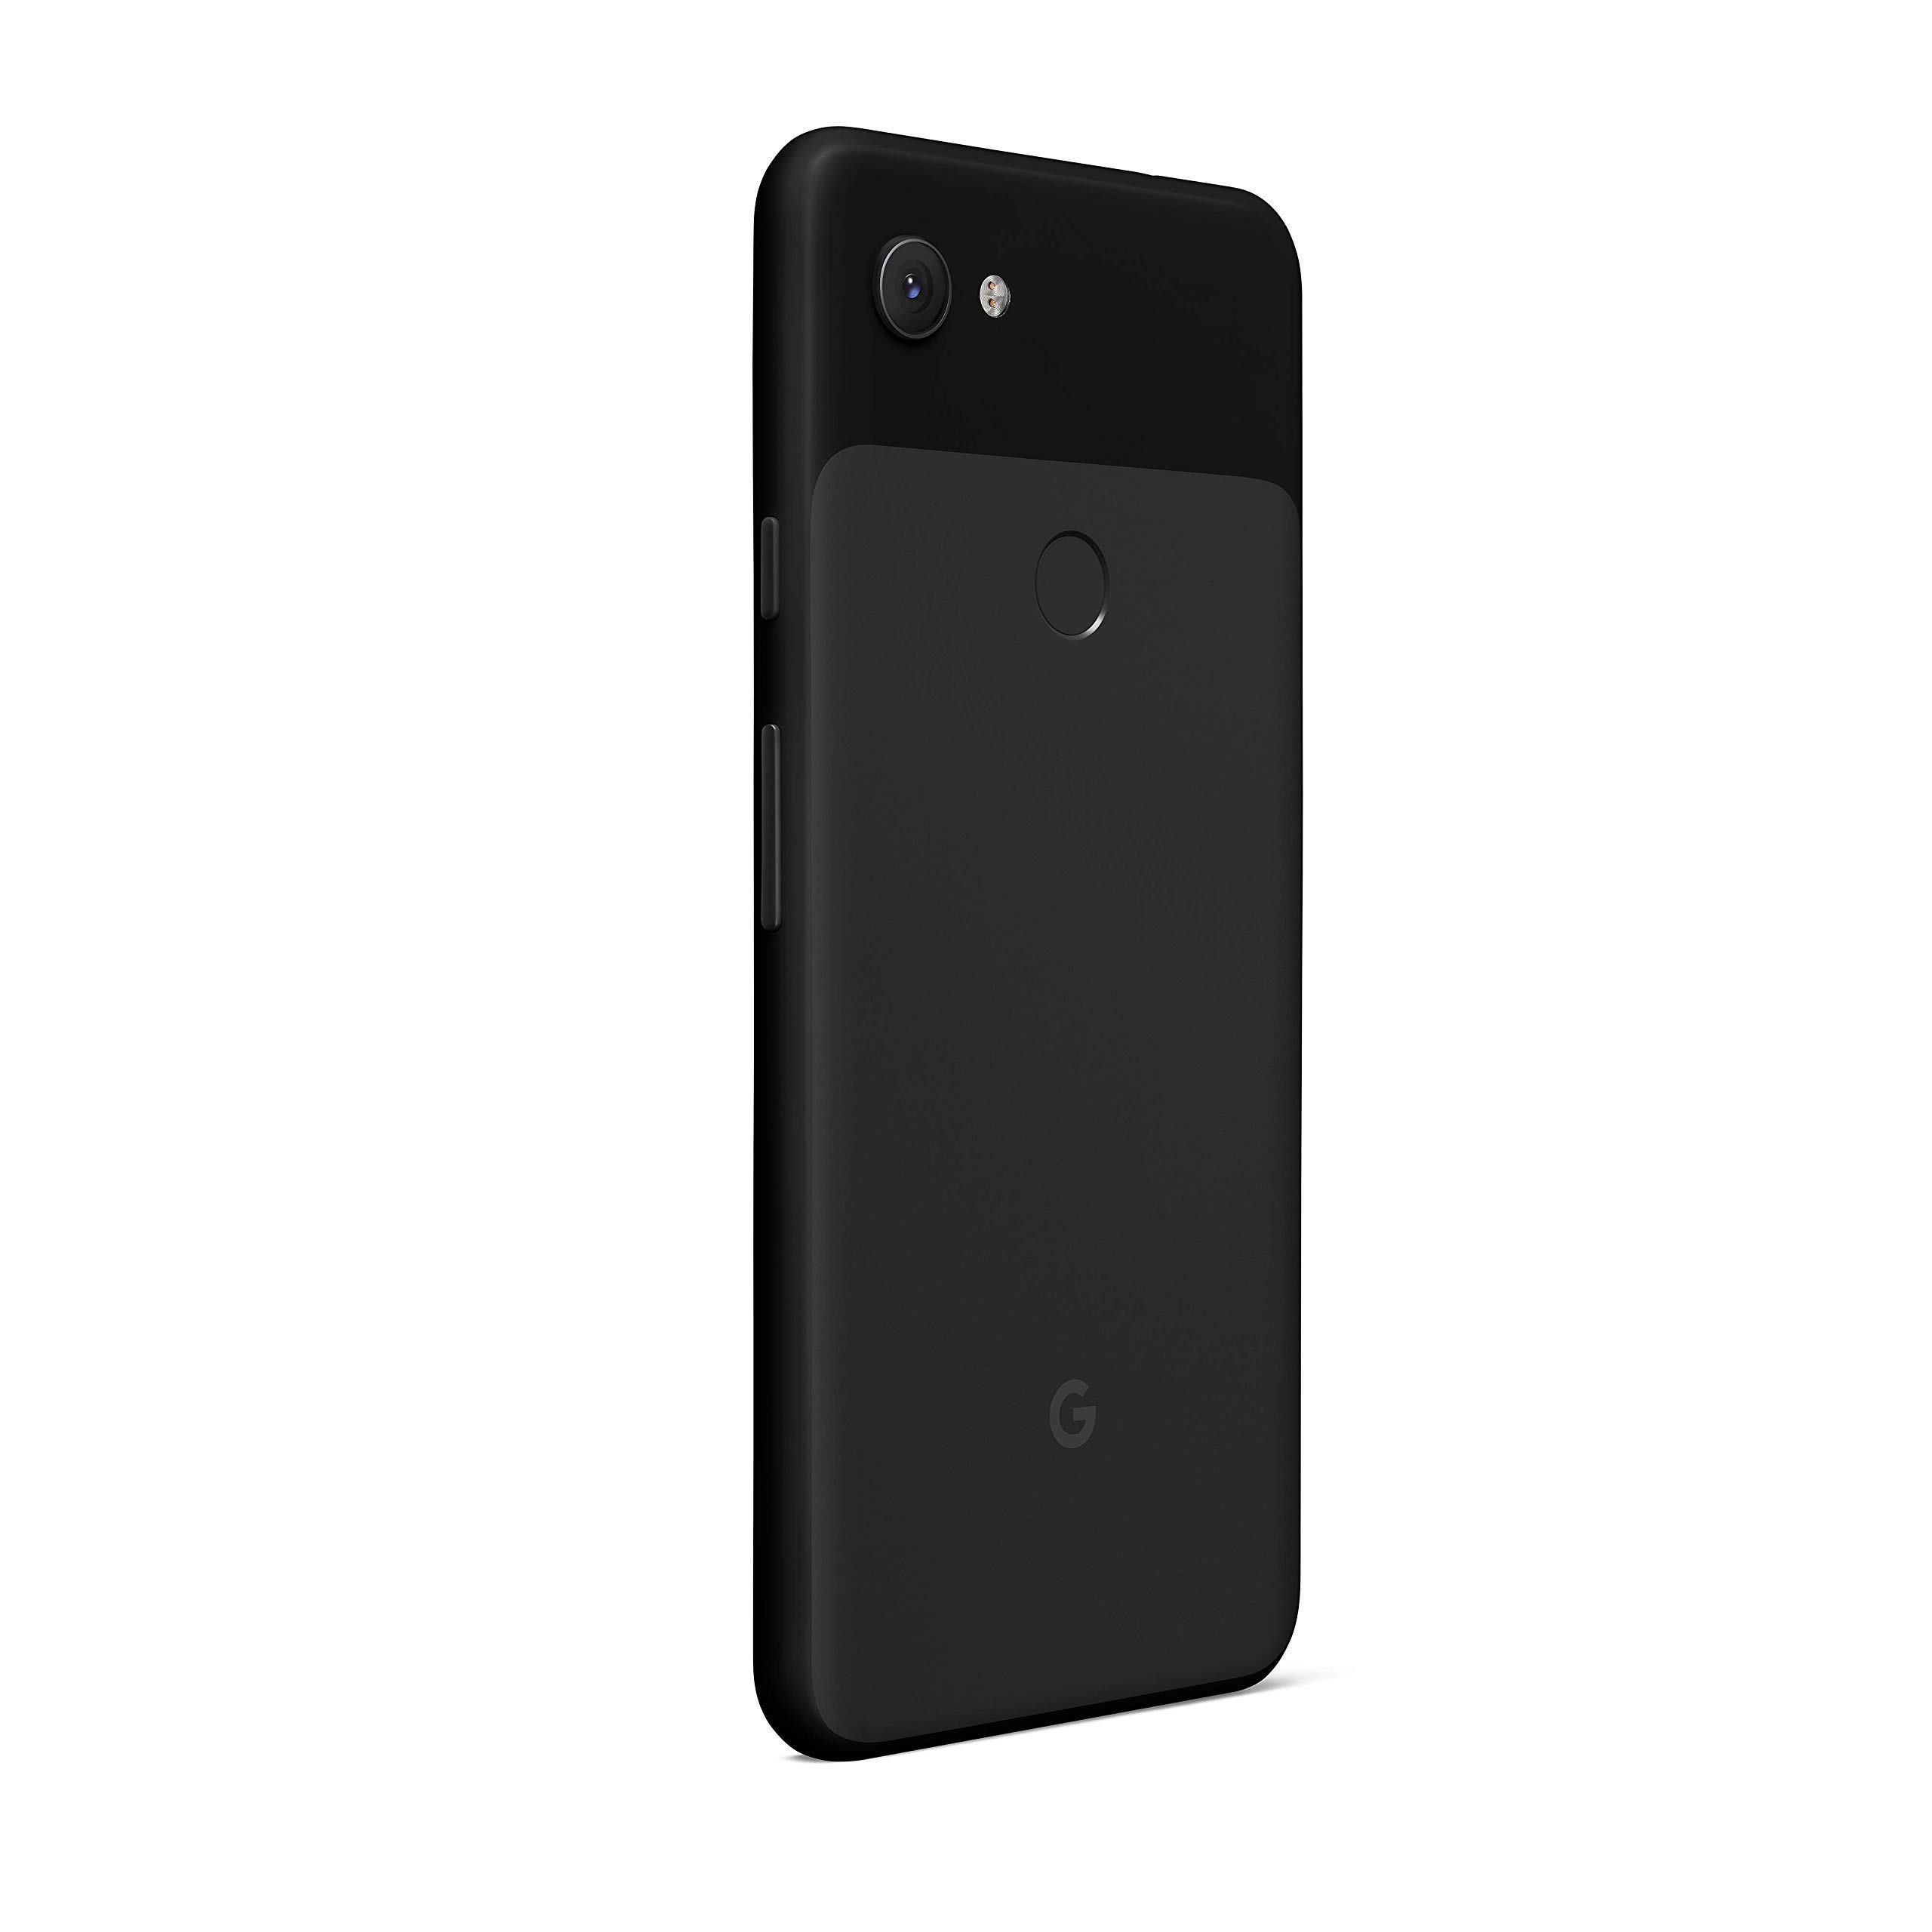 Google - Pixel 3a XL with 64GB Memory Cell Phone (Unlocked) - Just Black (Renewed)